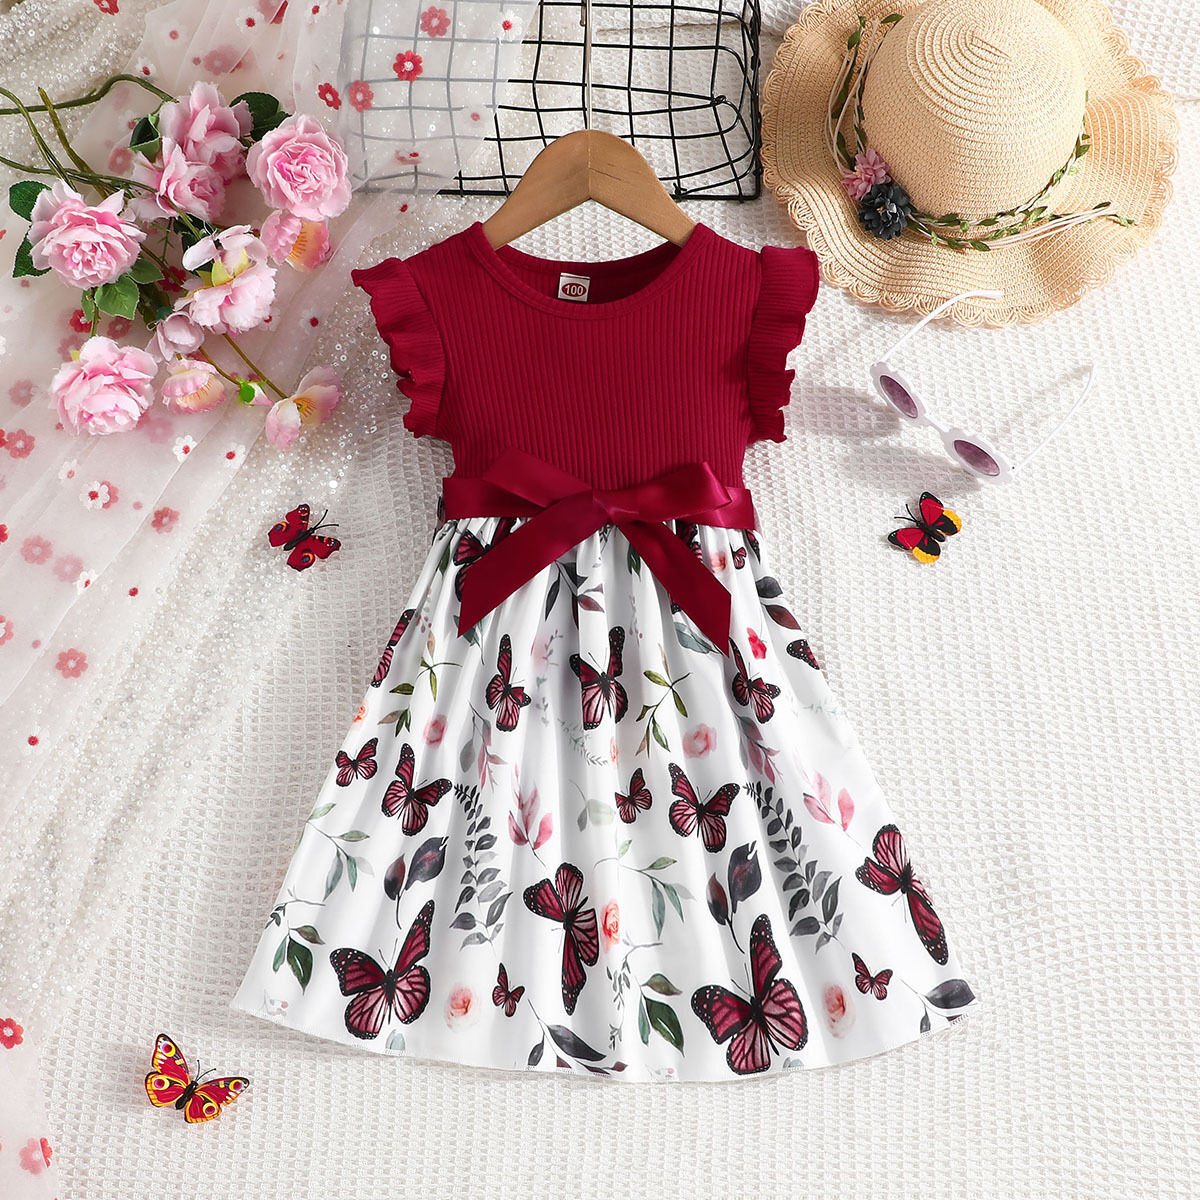 Butterfly Dresses